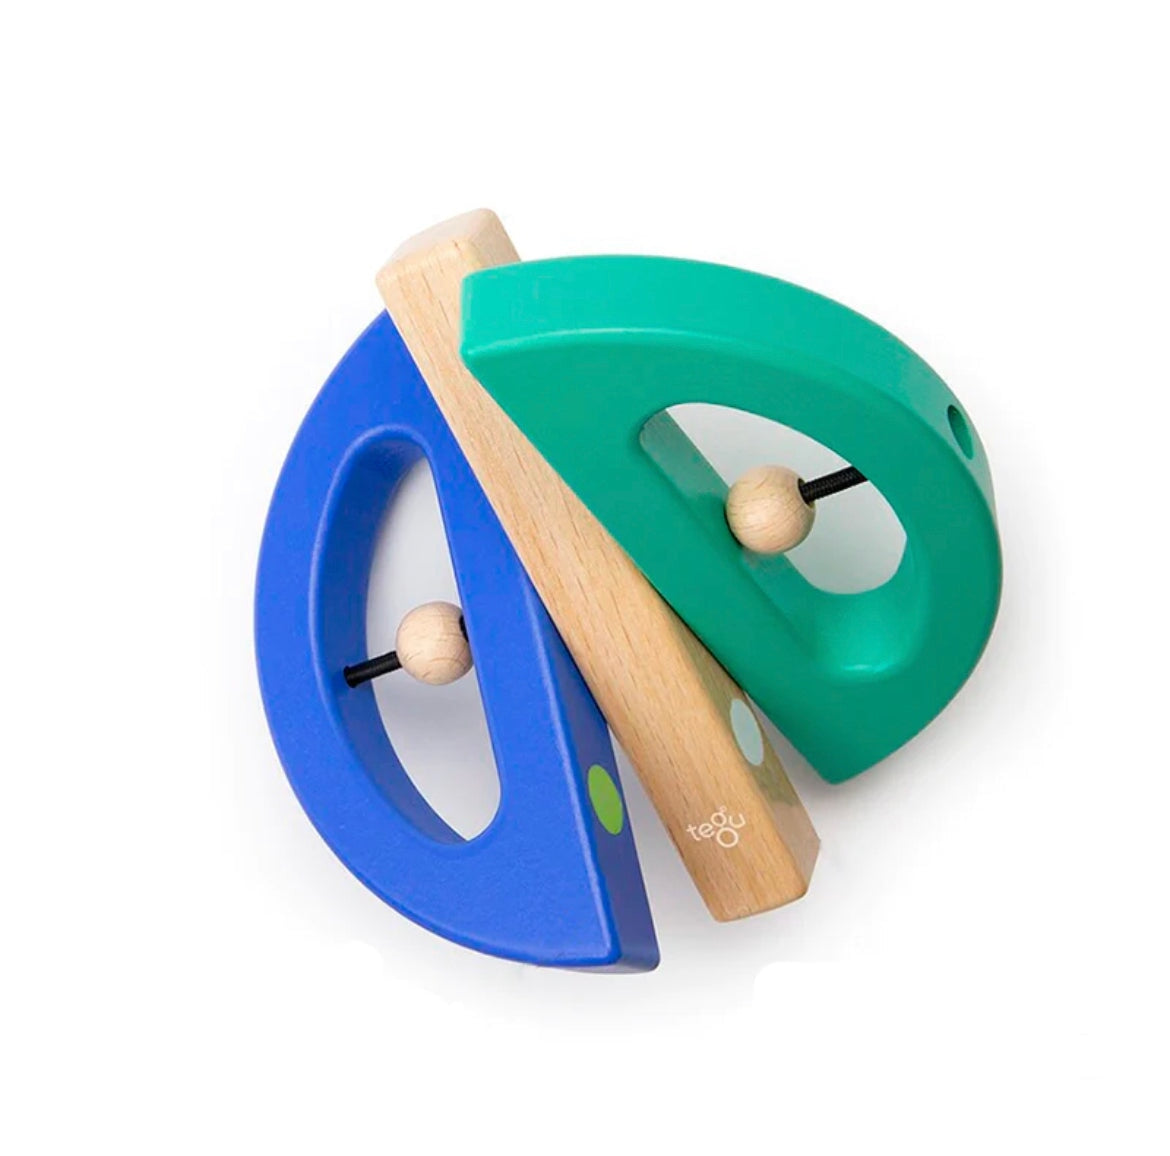 Tegu Swivel Bug Rattle and Toy | Magnetic Toy - Alder & Alouette